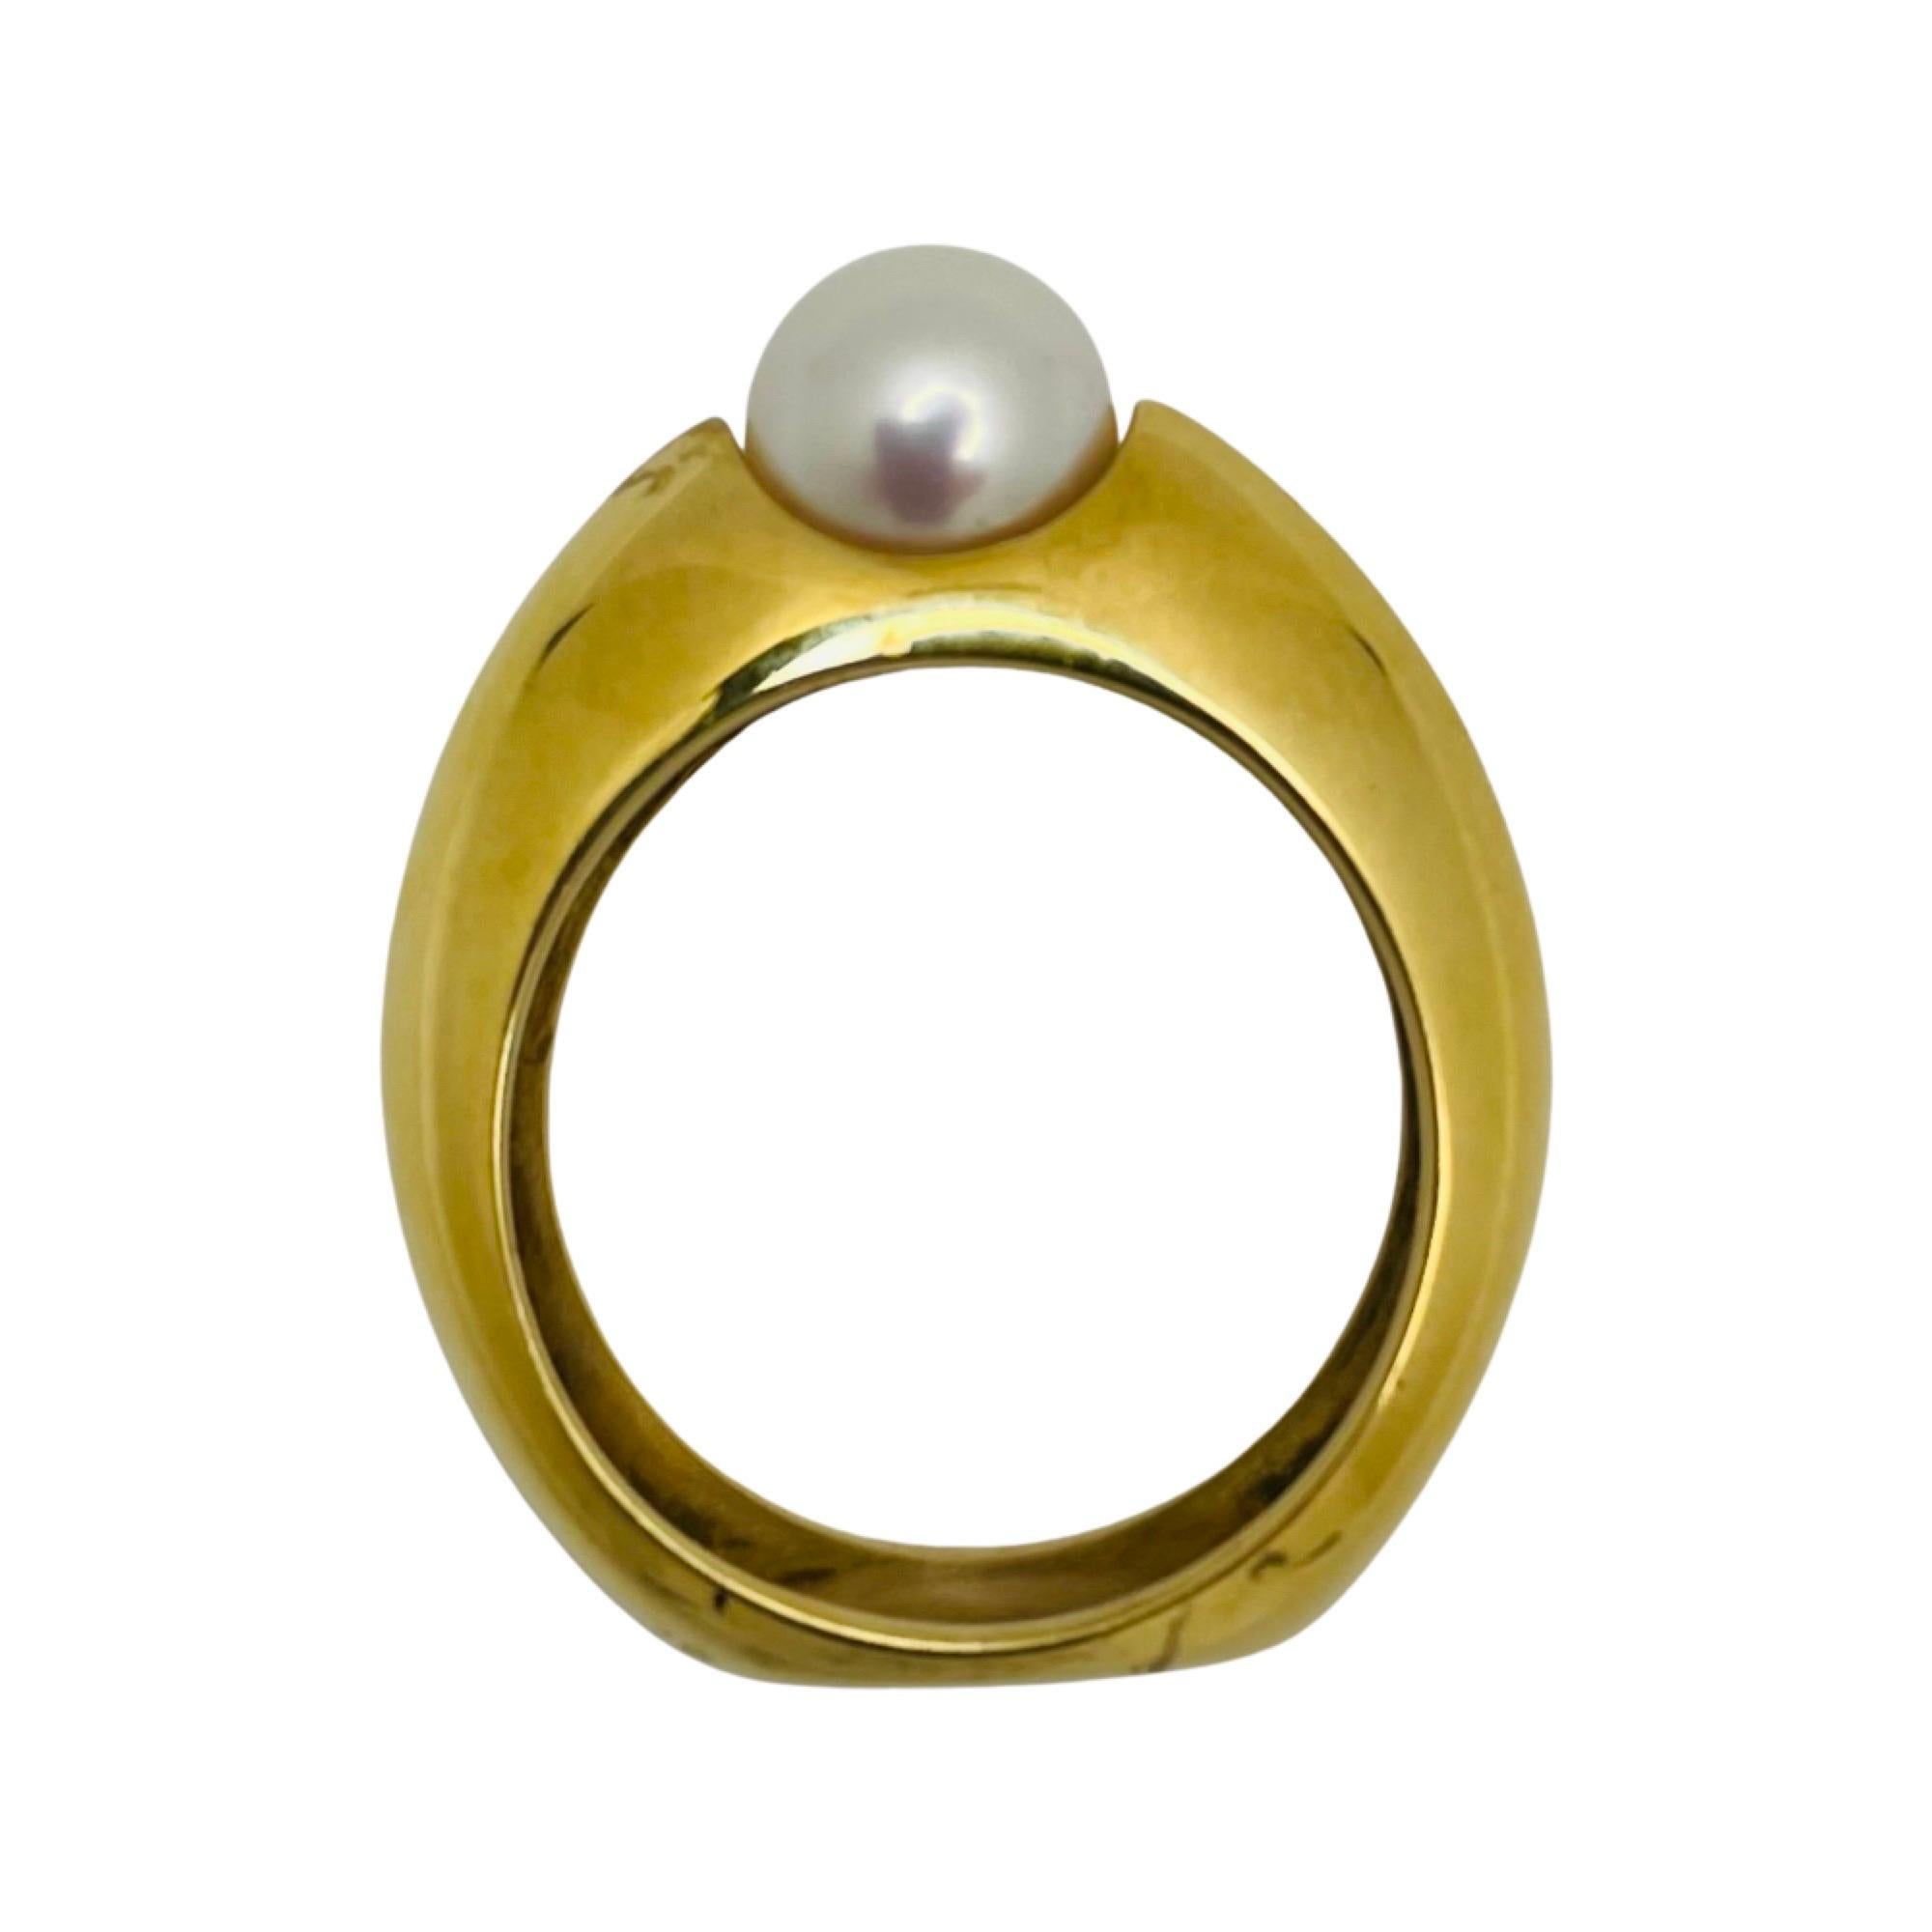 William Richey 18K Yellow Gold Japanese Akoya Pearl Ring with a Euro Shank In New Condition For Sale In Kirkwood, MO